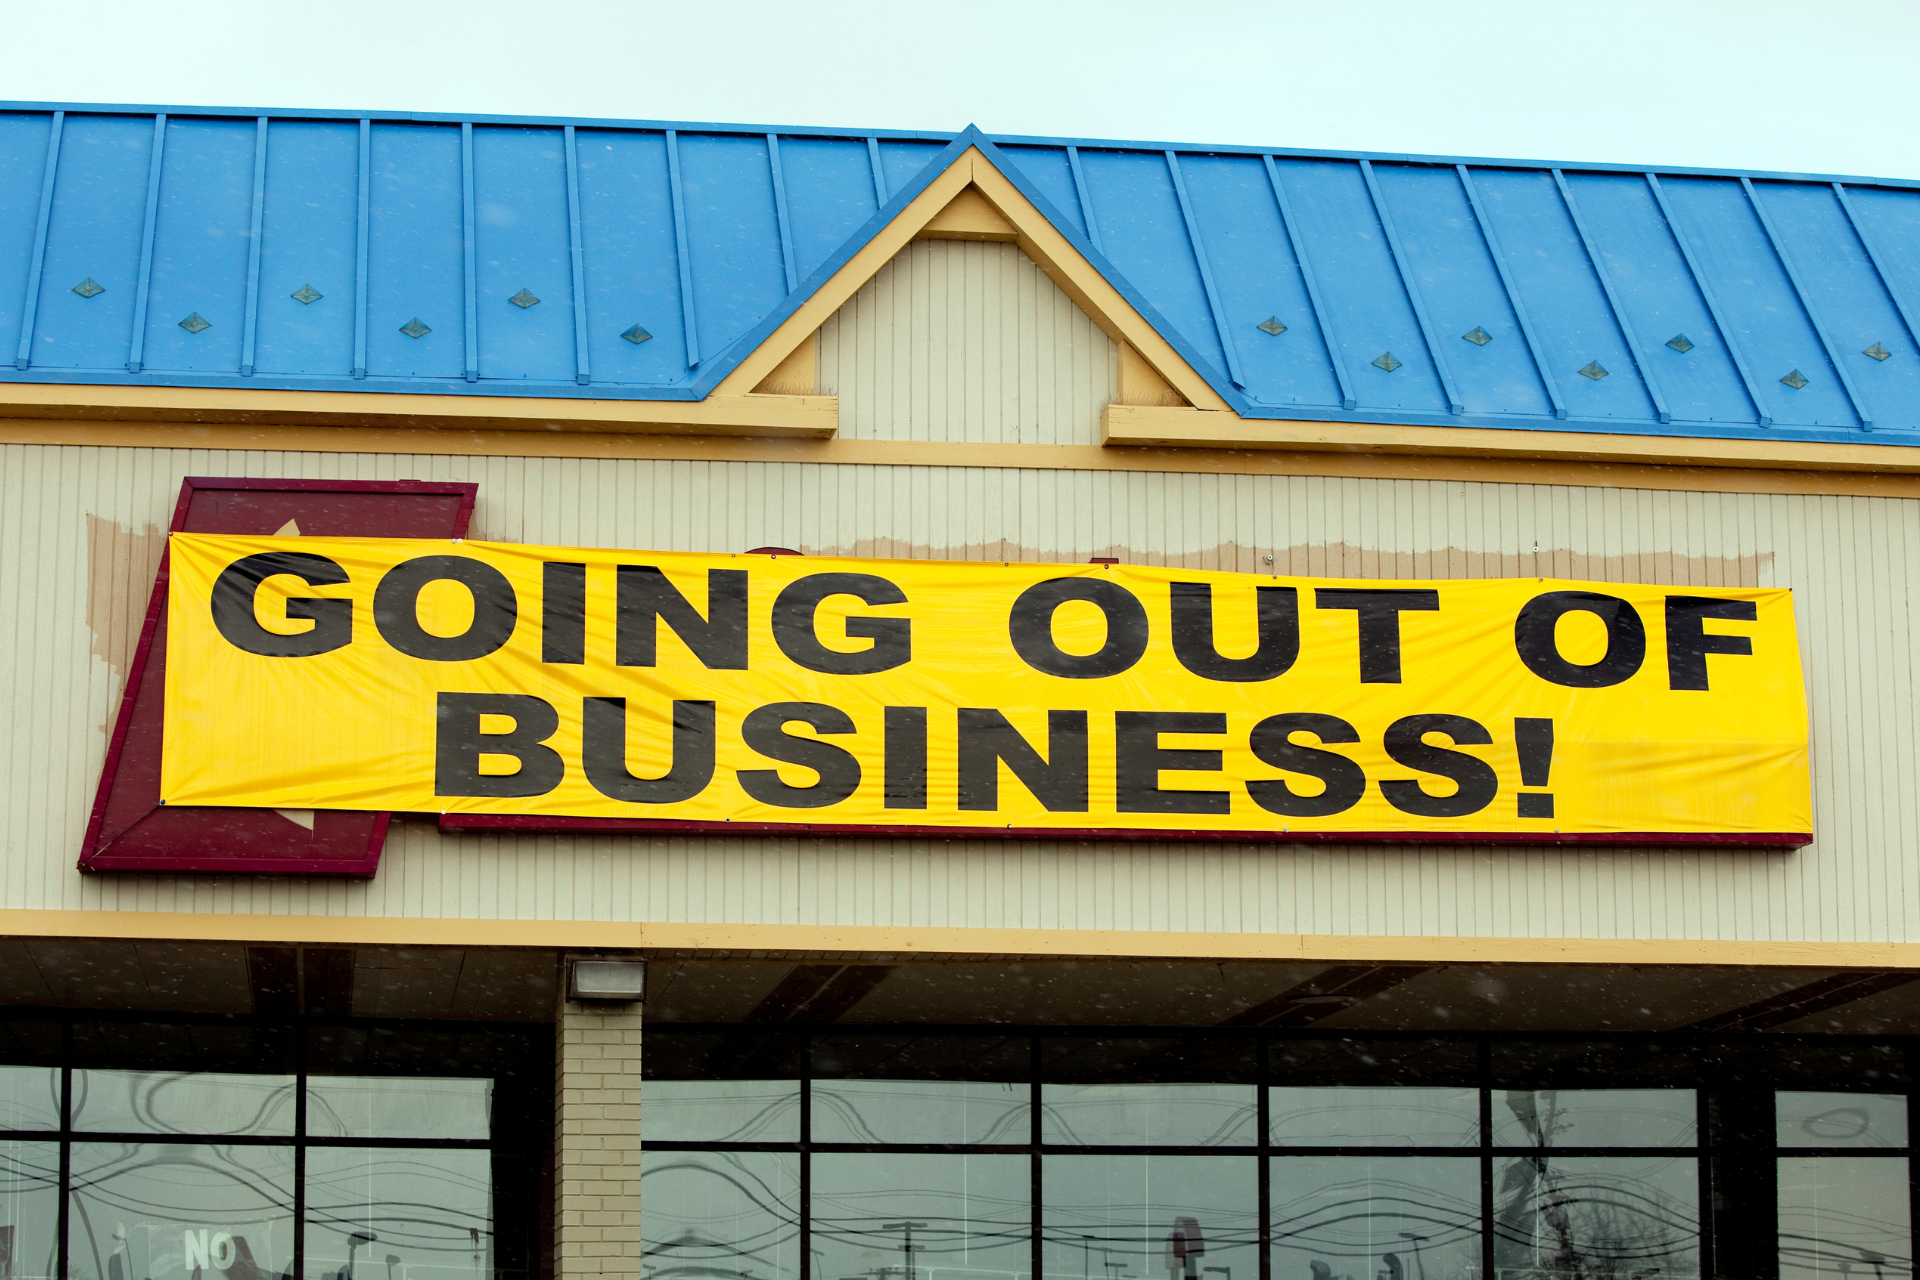 A commercial building storefront with a 'going out of business' sign prominently displayed over the store's original sign.